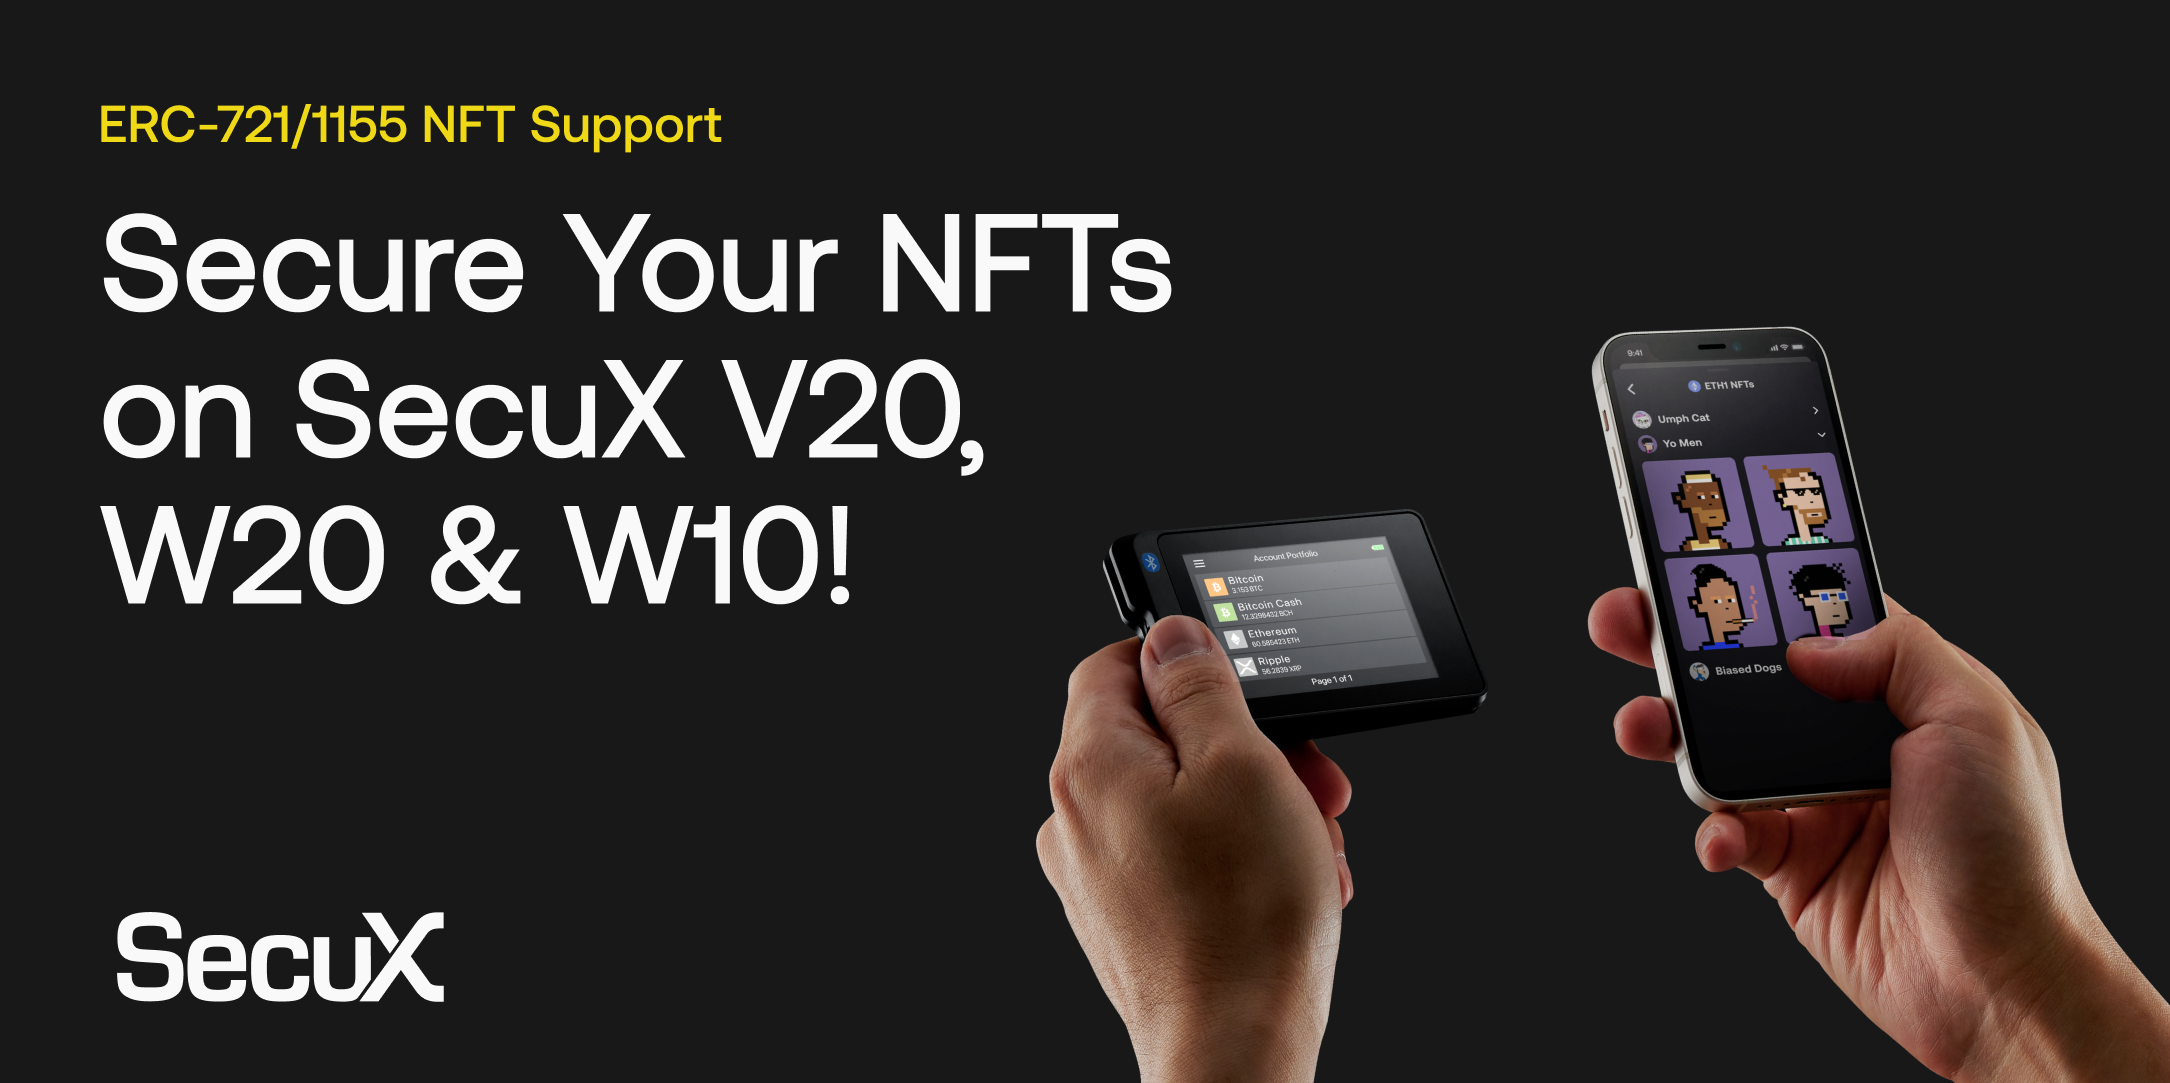 Secure your NFTs on SecuX V20 W20 W101